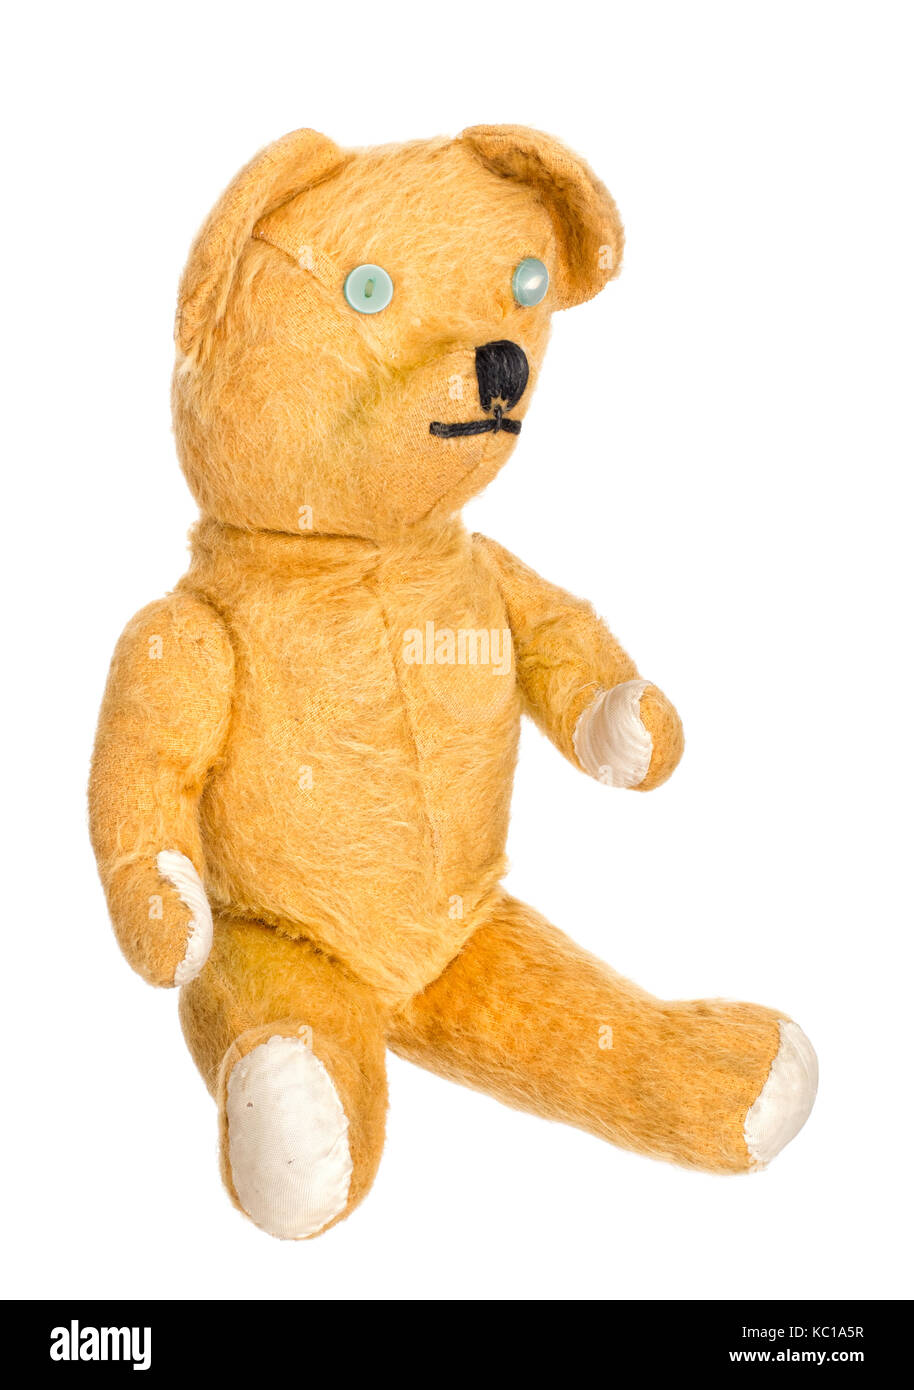 Old, much loved, much repaired, unbranded toy teddy bear isolated. Stock Photo